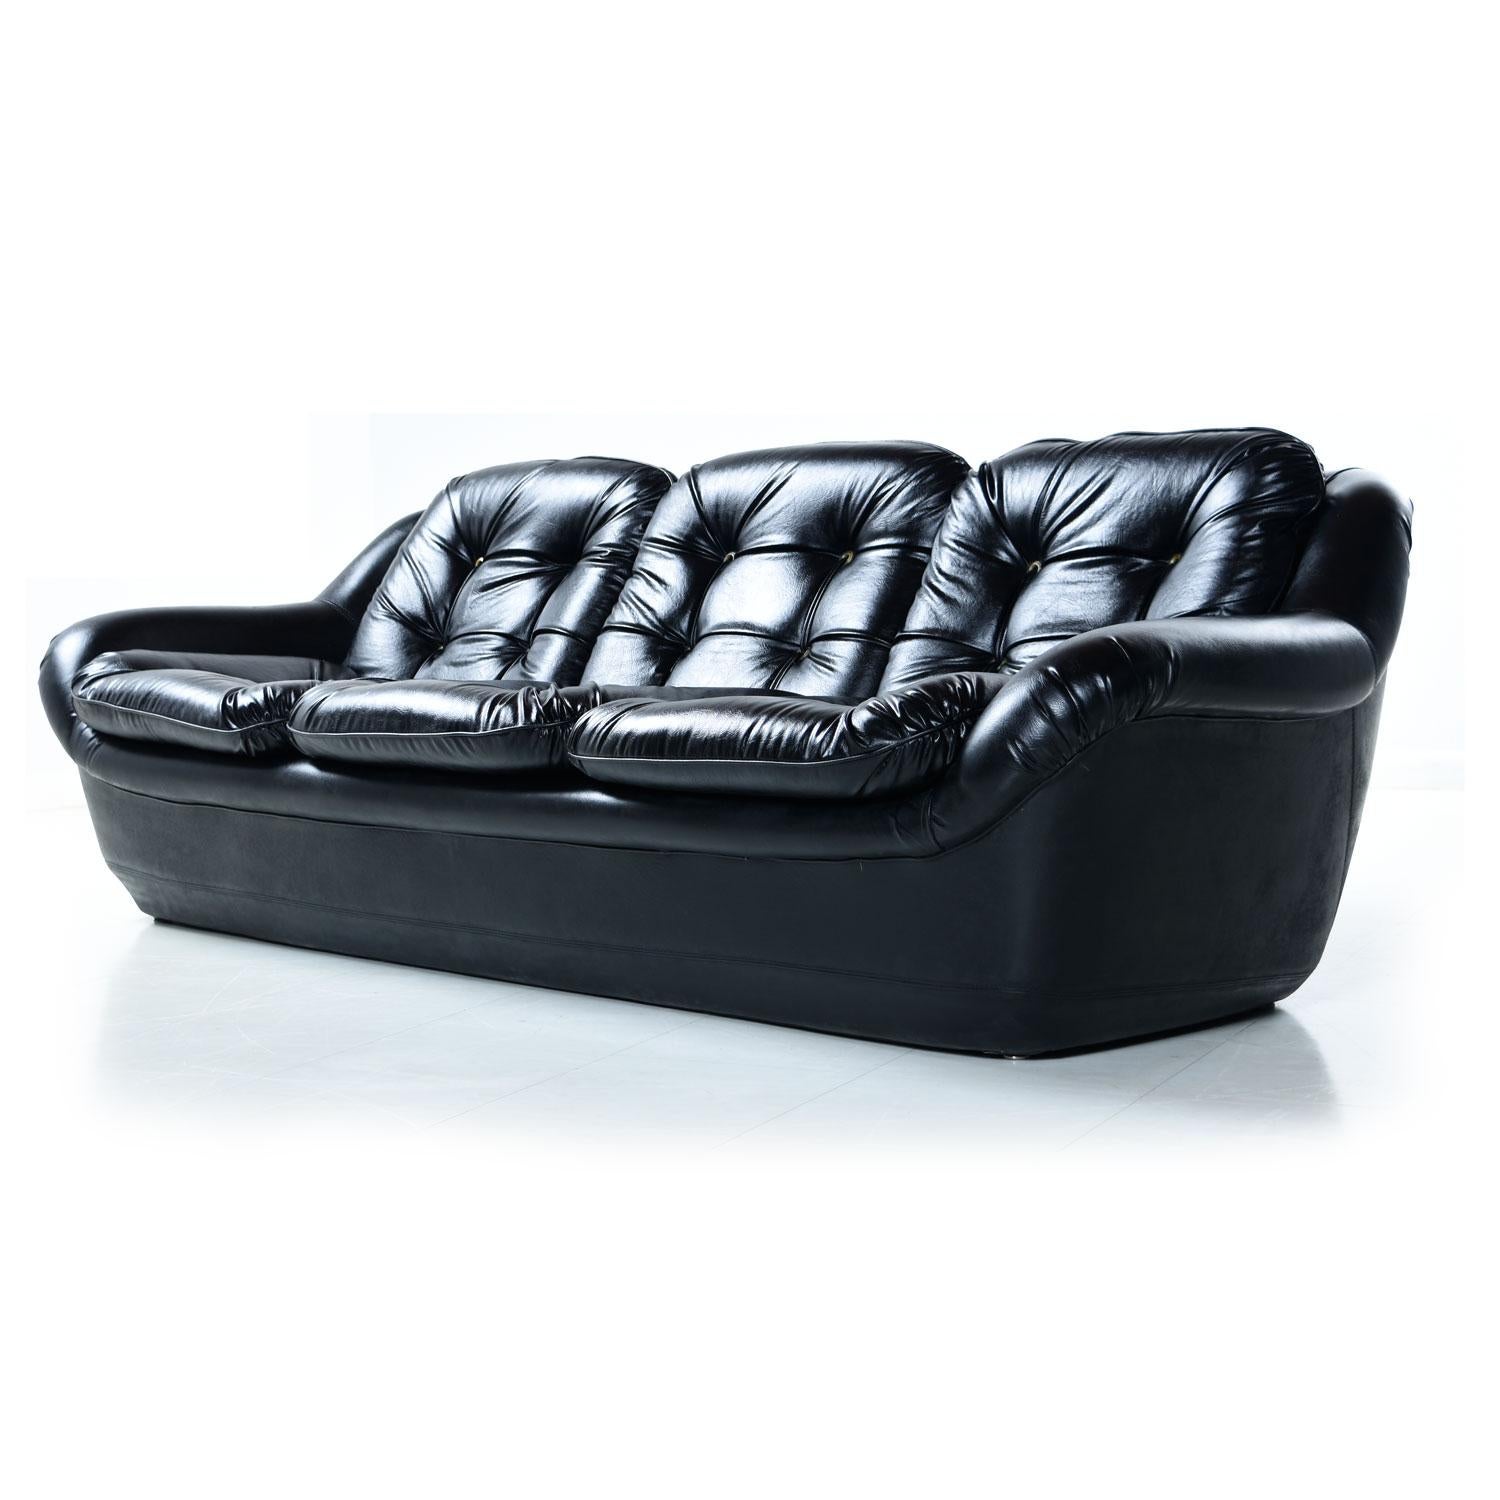 Mid-Century Modern overman pod style molded frame sofa and chair with unique chorded buttons. This magnificent set is all original! The time capsule quality pieces are outfitted in their original black Naugahyde (high quality faux leather vinyl).